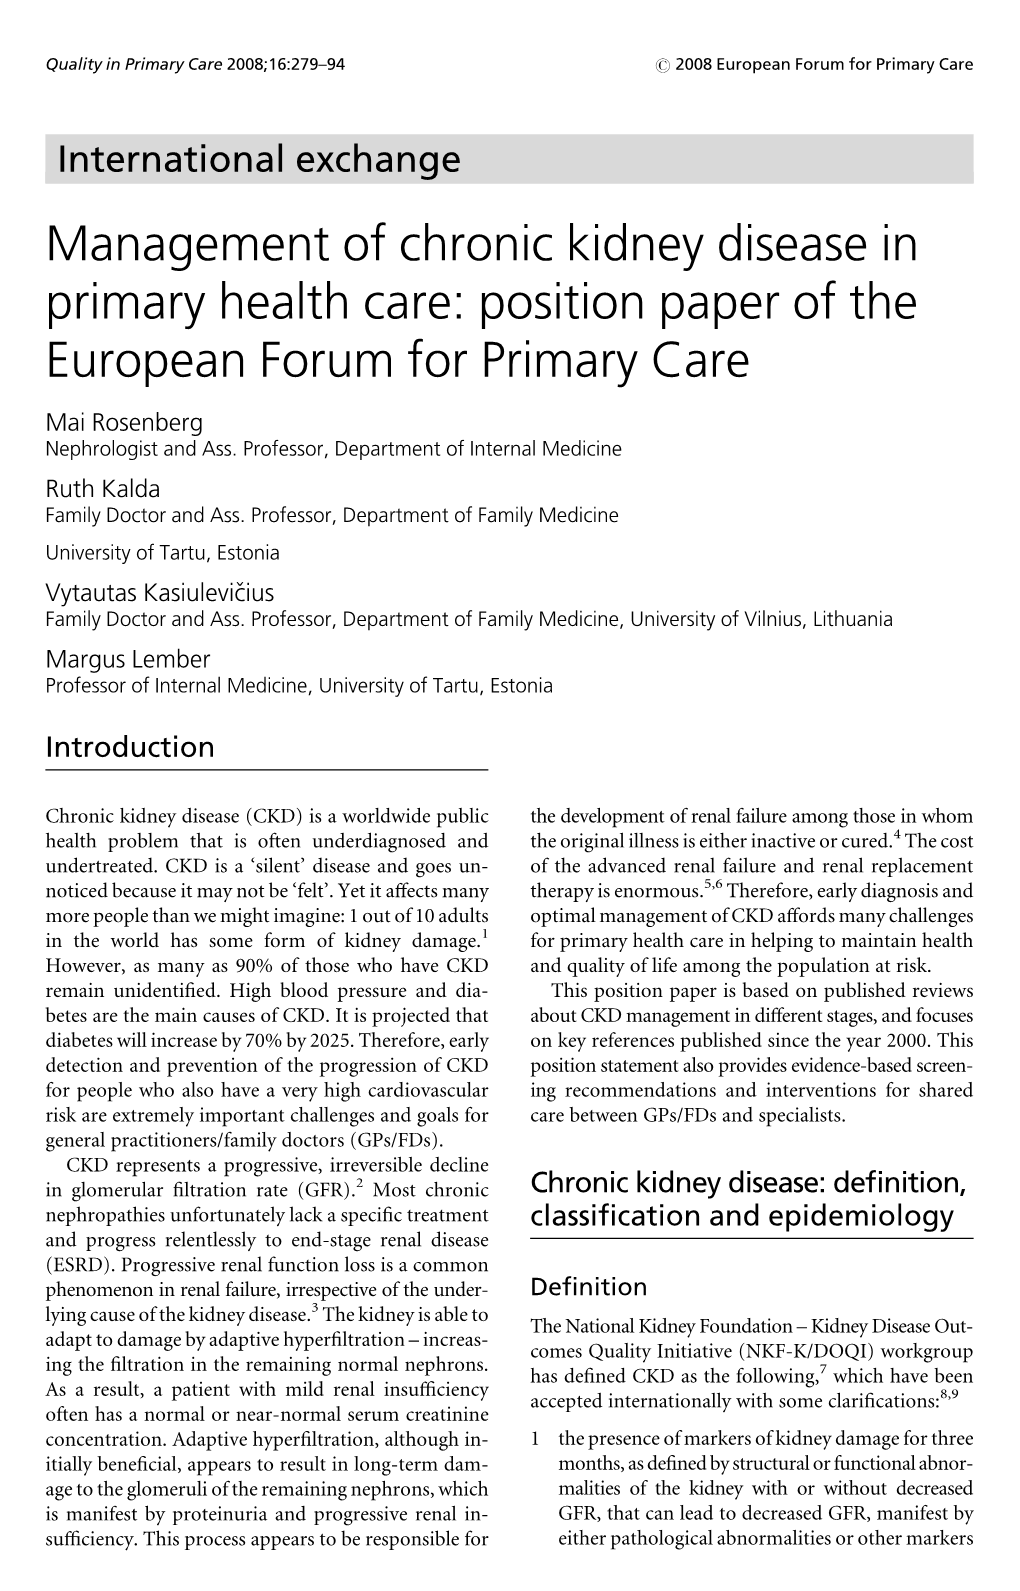 Management of Chronic Kidney Disease in Primary Health Care: Position Paper of the European Forum for Primary Care Mai Rosenberg Nephrologist and Ass